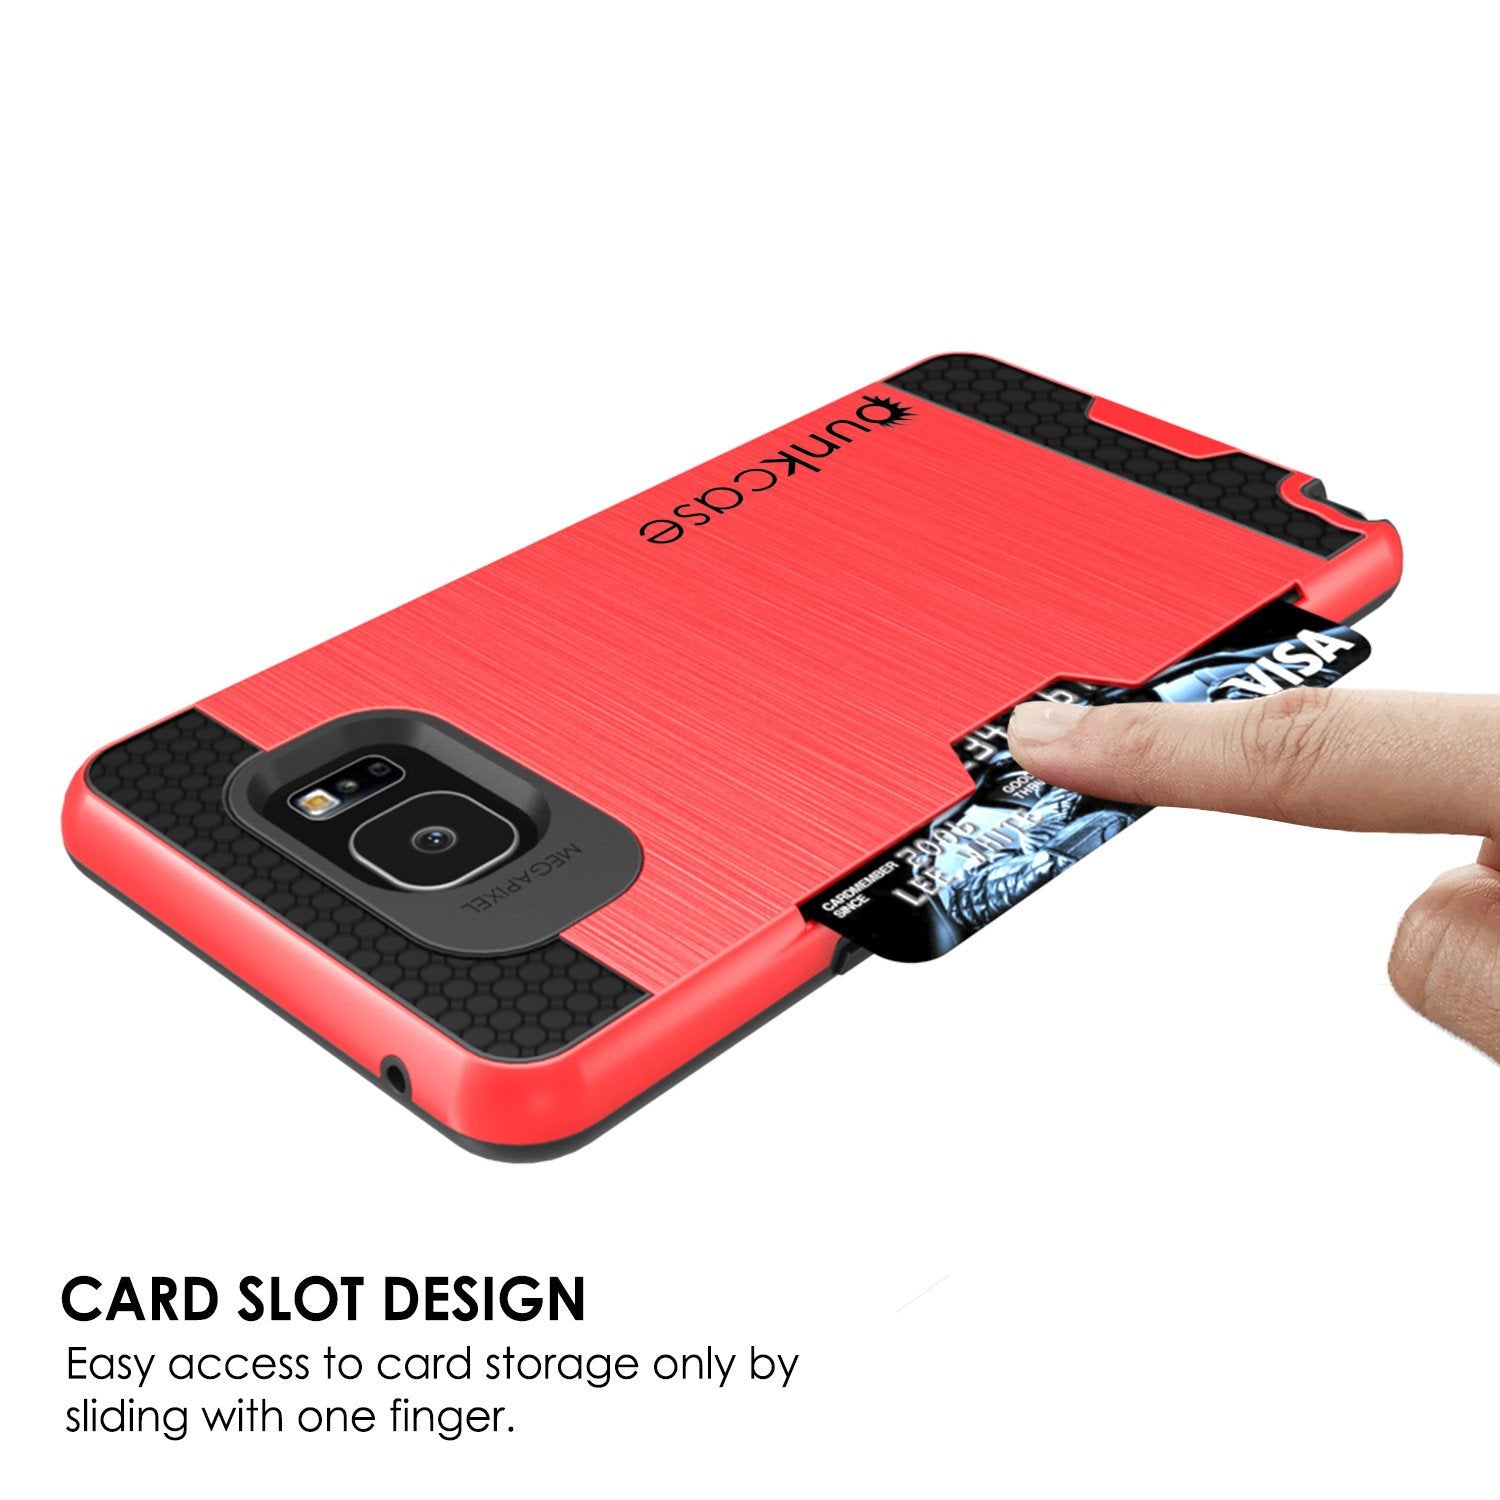 Galaxy Note 5 Case PunkCase SLOT Red Series Slim Armor Soft Cover Case w/ Tempered Glass - PunkCase NZ